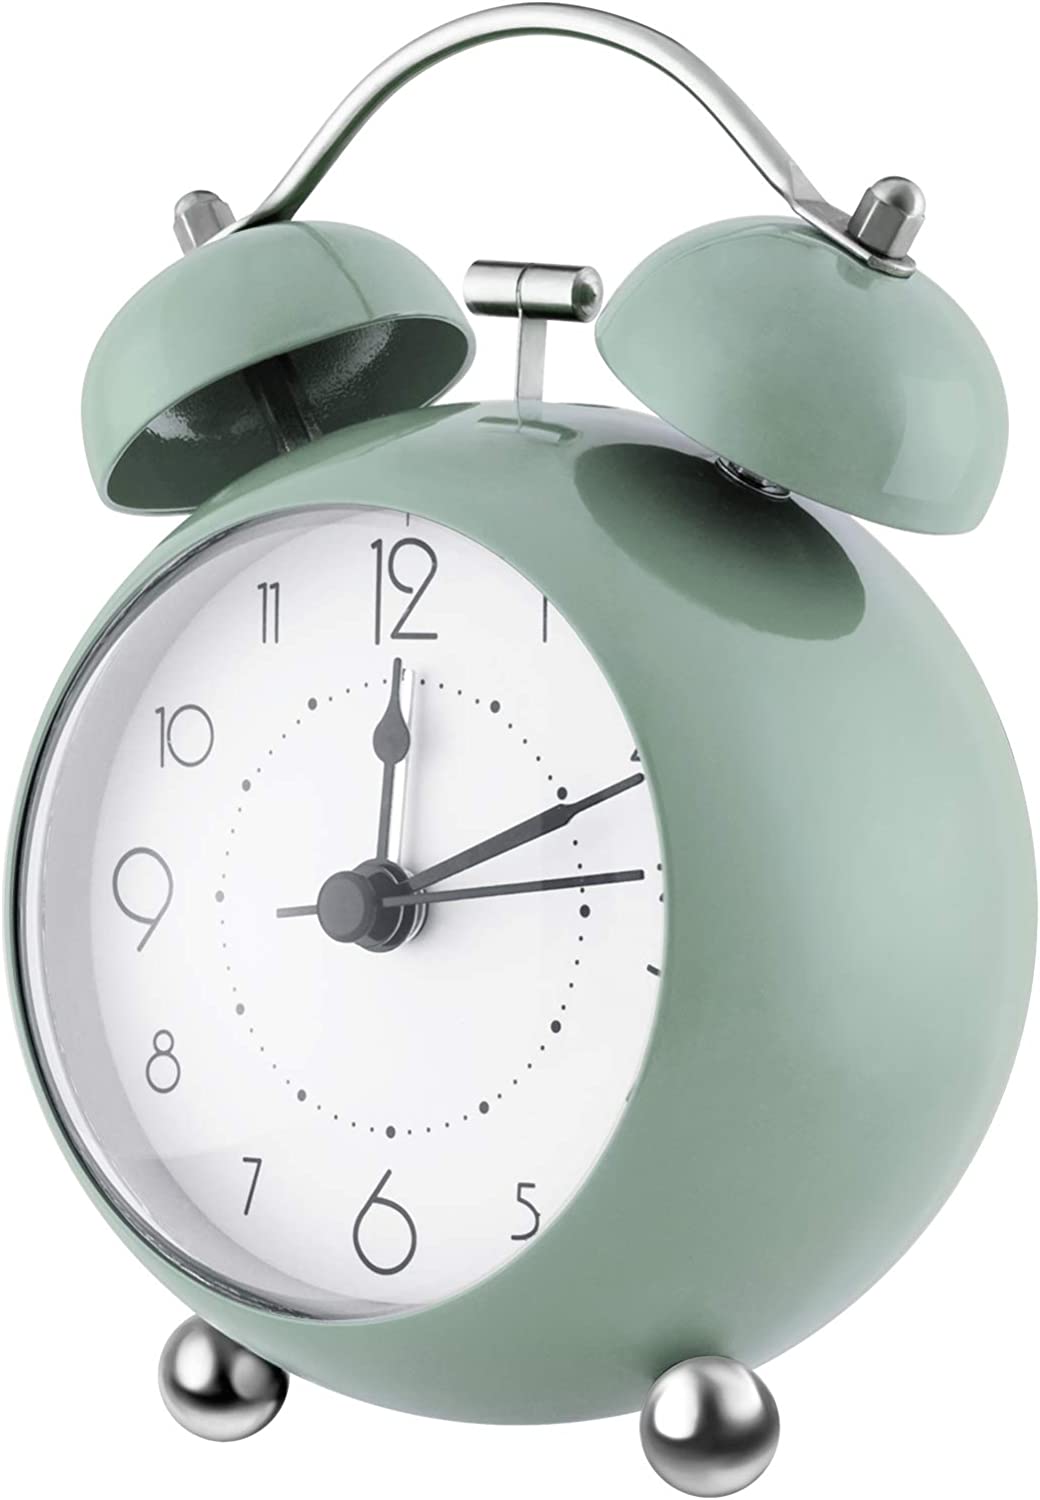 ZOJI Retro Twin Bells Bedside Alarm Clock, Non-Ticking 3.34-Inch Round Convex Mini Clock with Nightlight, Large Digital Display Clock for Bedroom, Office, or Travel, Green 3